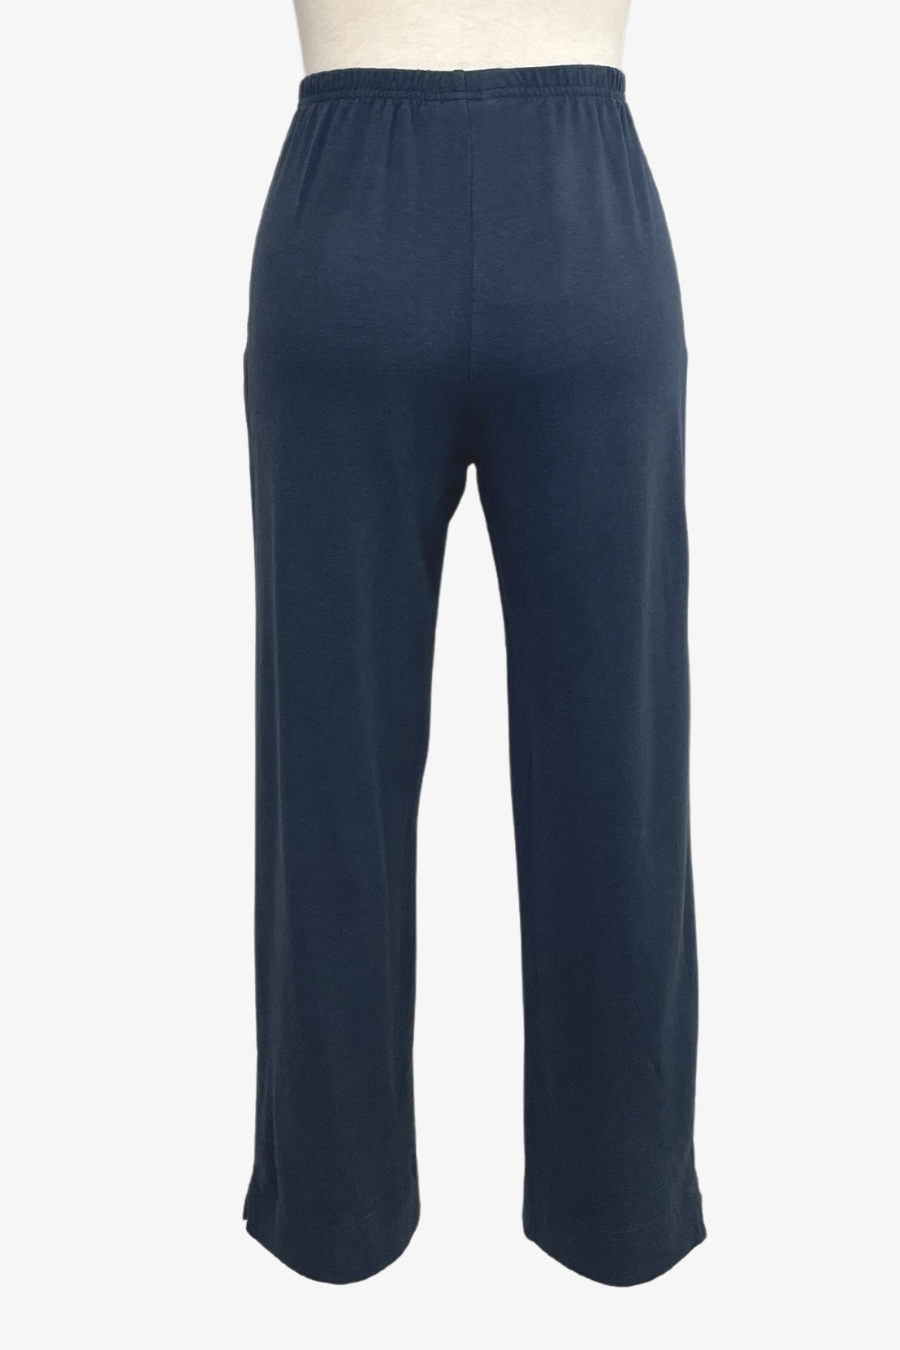 Anka Pant in Bamboo French Terry